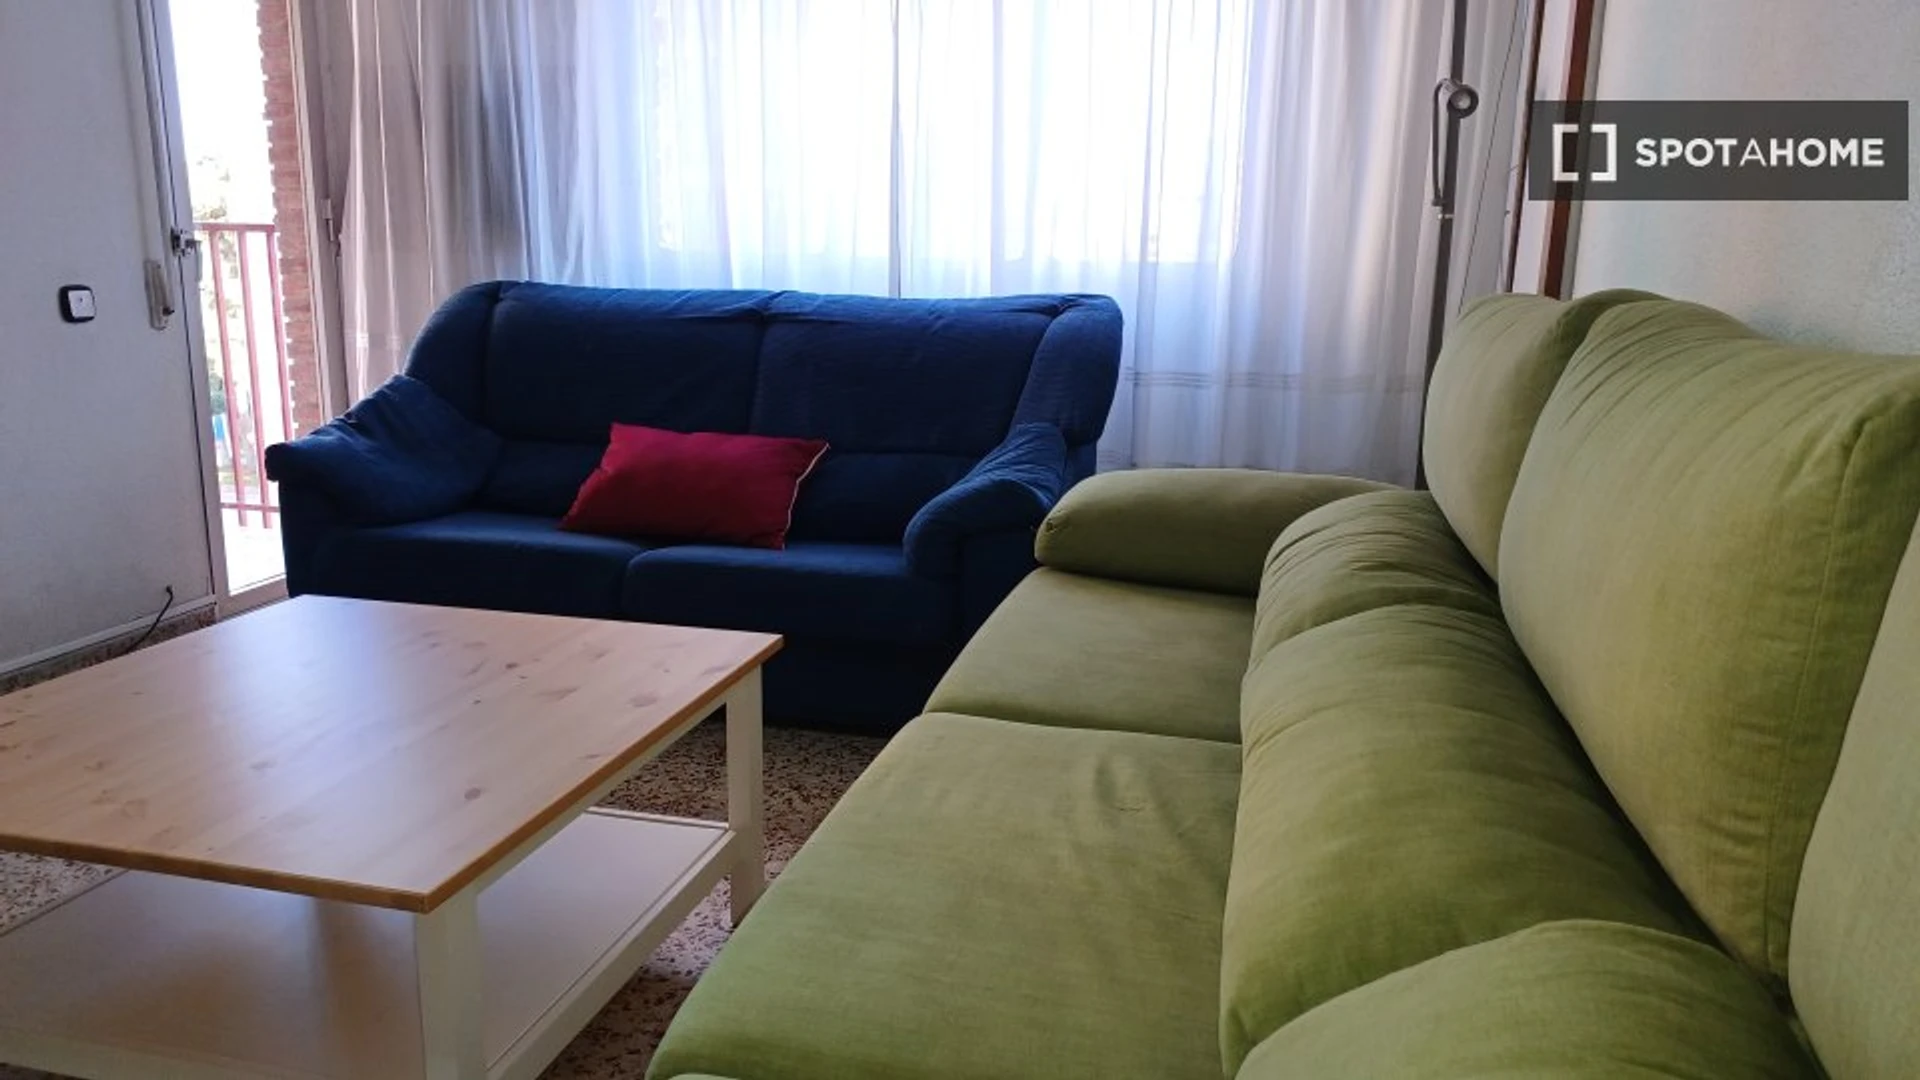 Room for rent in a shared flat in Murcia